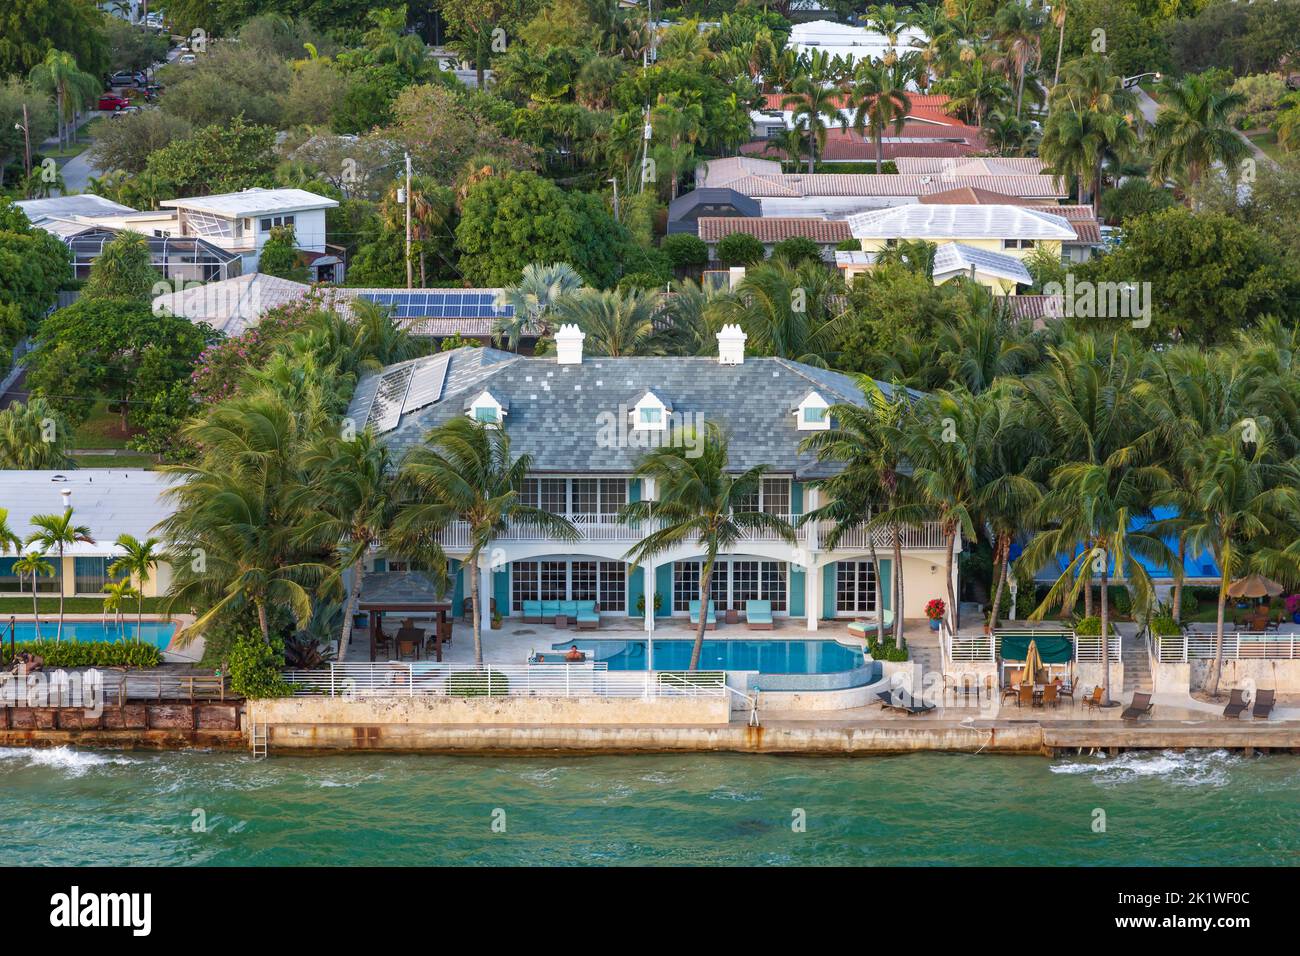 A residential estate along the intercoastal waterway in Fort Lauderdale, Florida, USA. Stock Photo